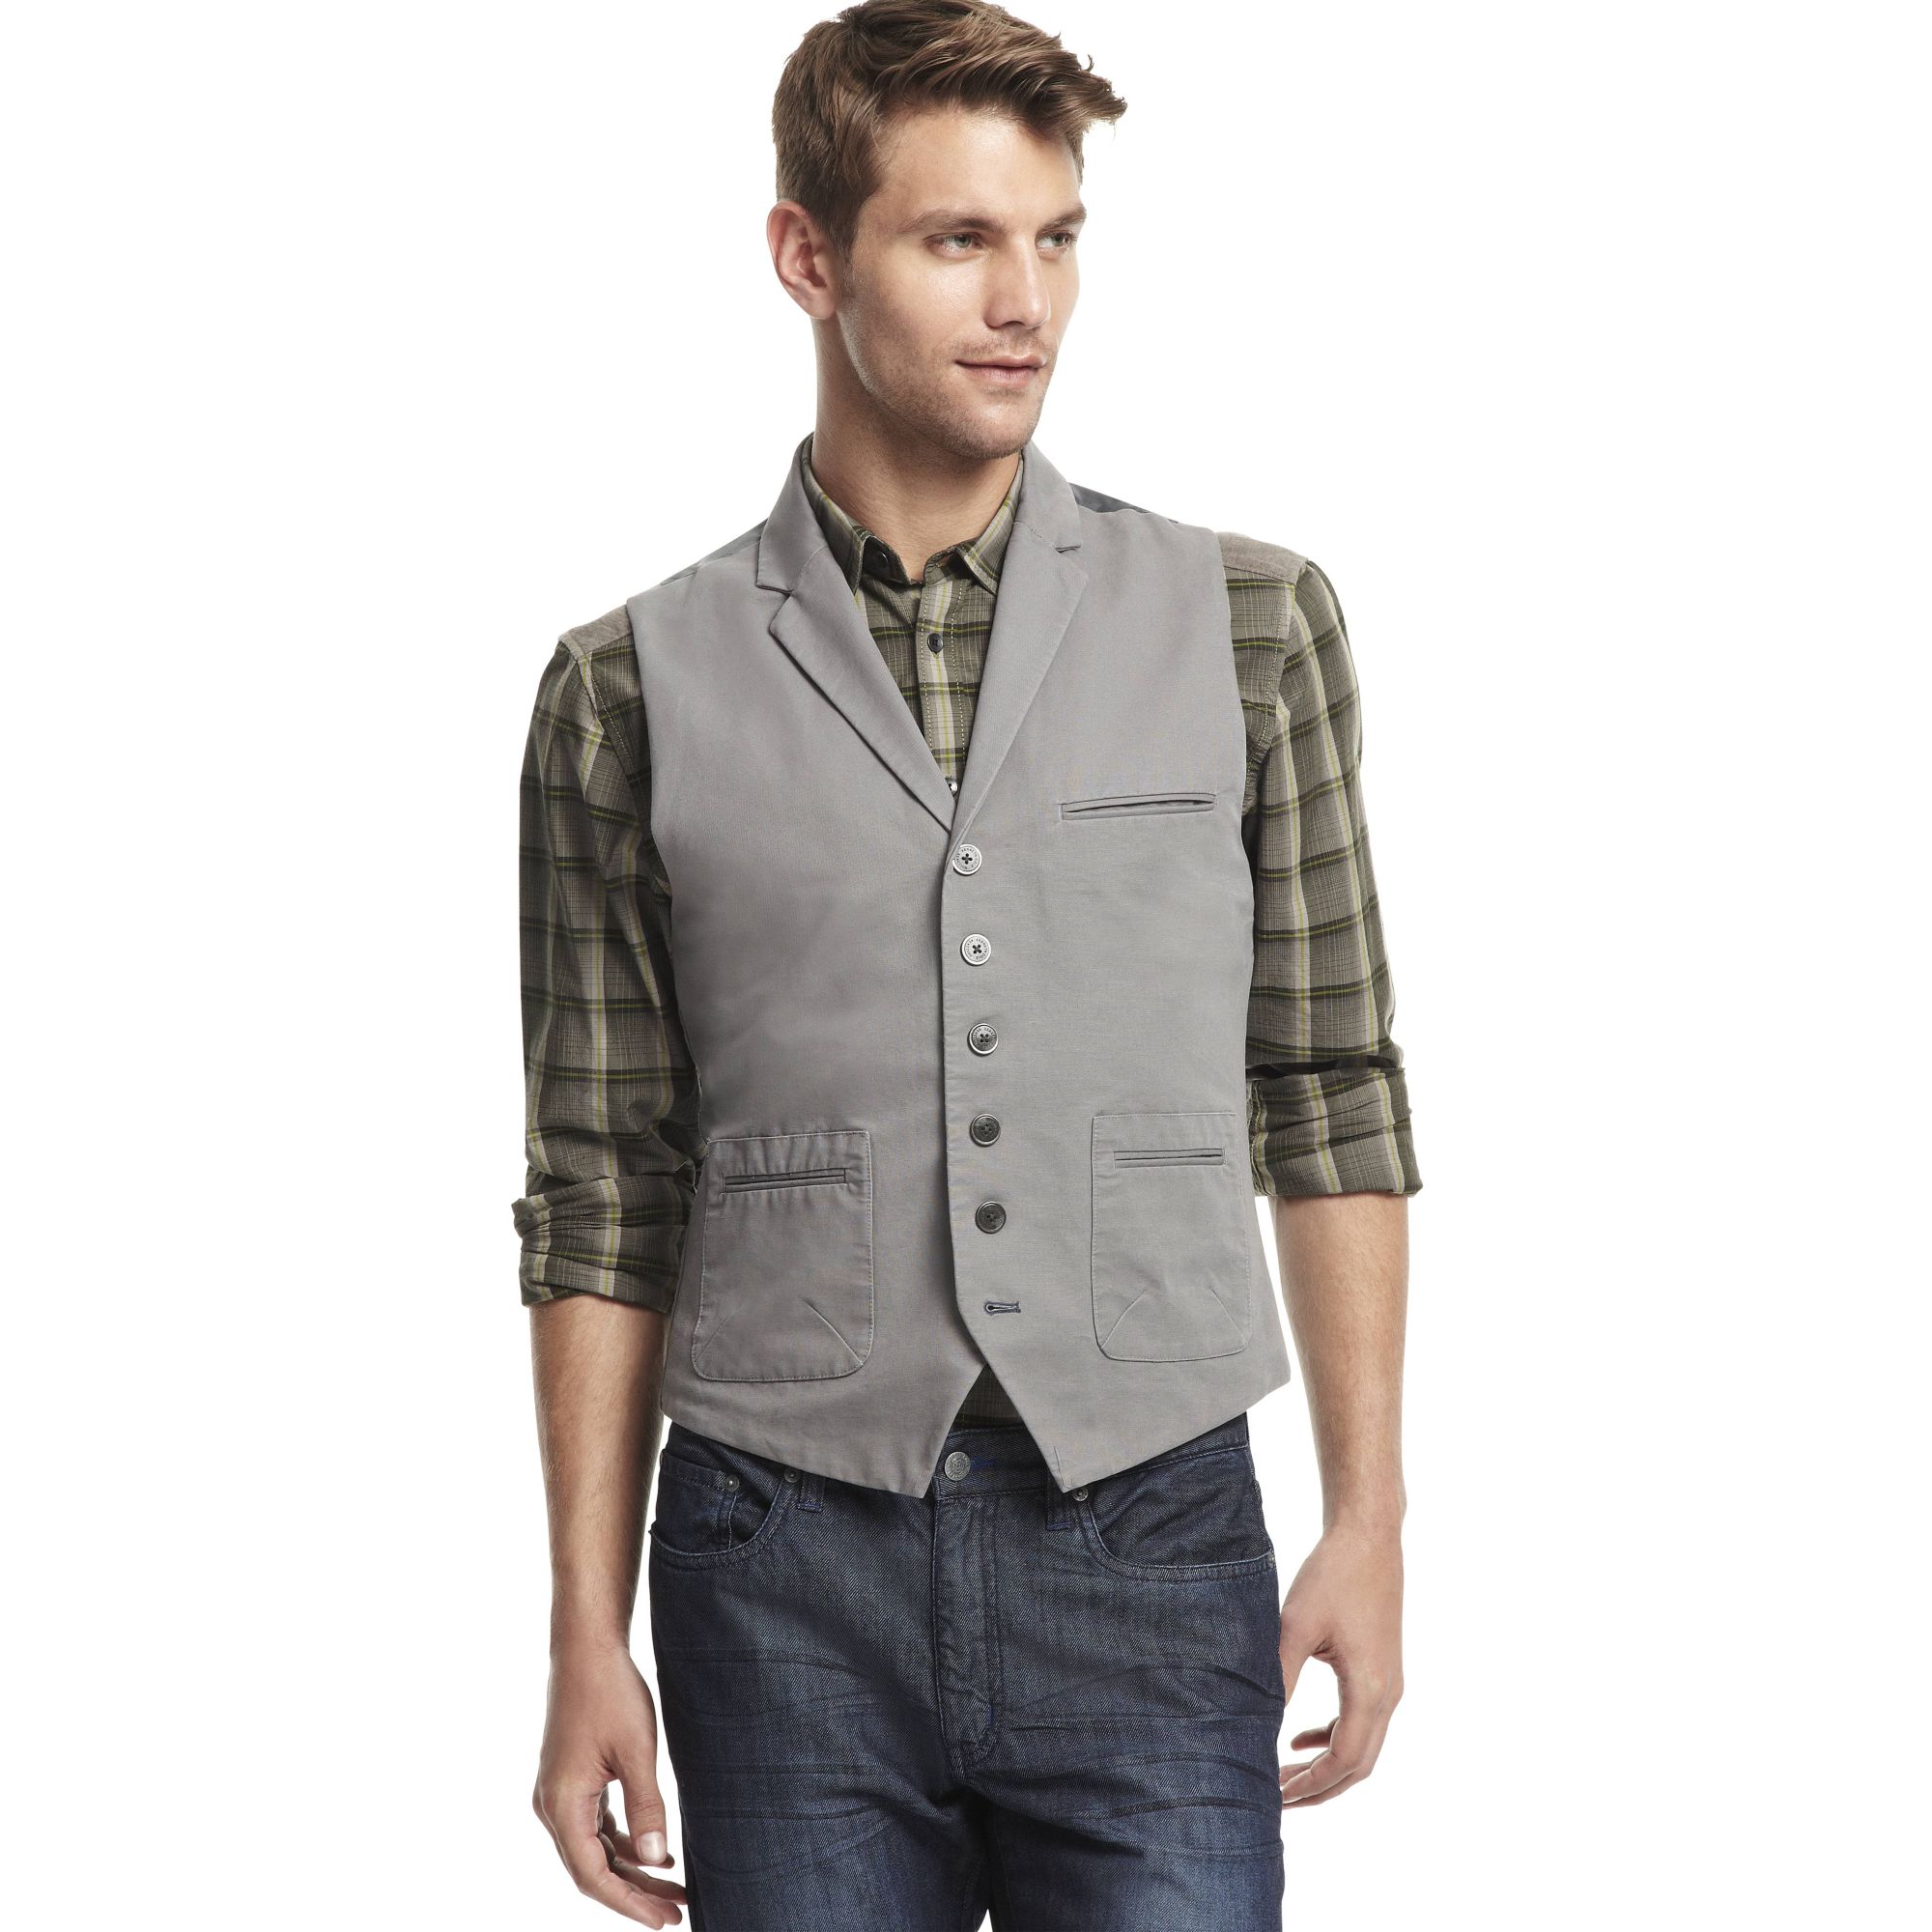 Lyst - Kenneth Cole Reaction Collar Vest in Gray for Men